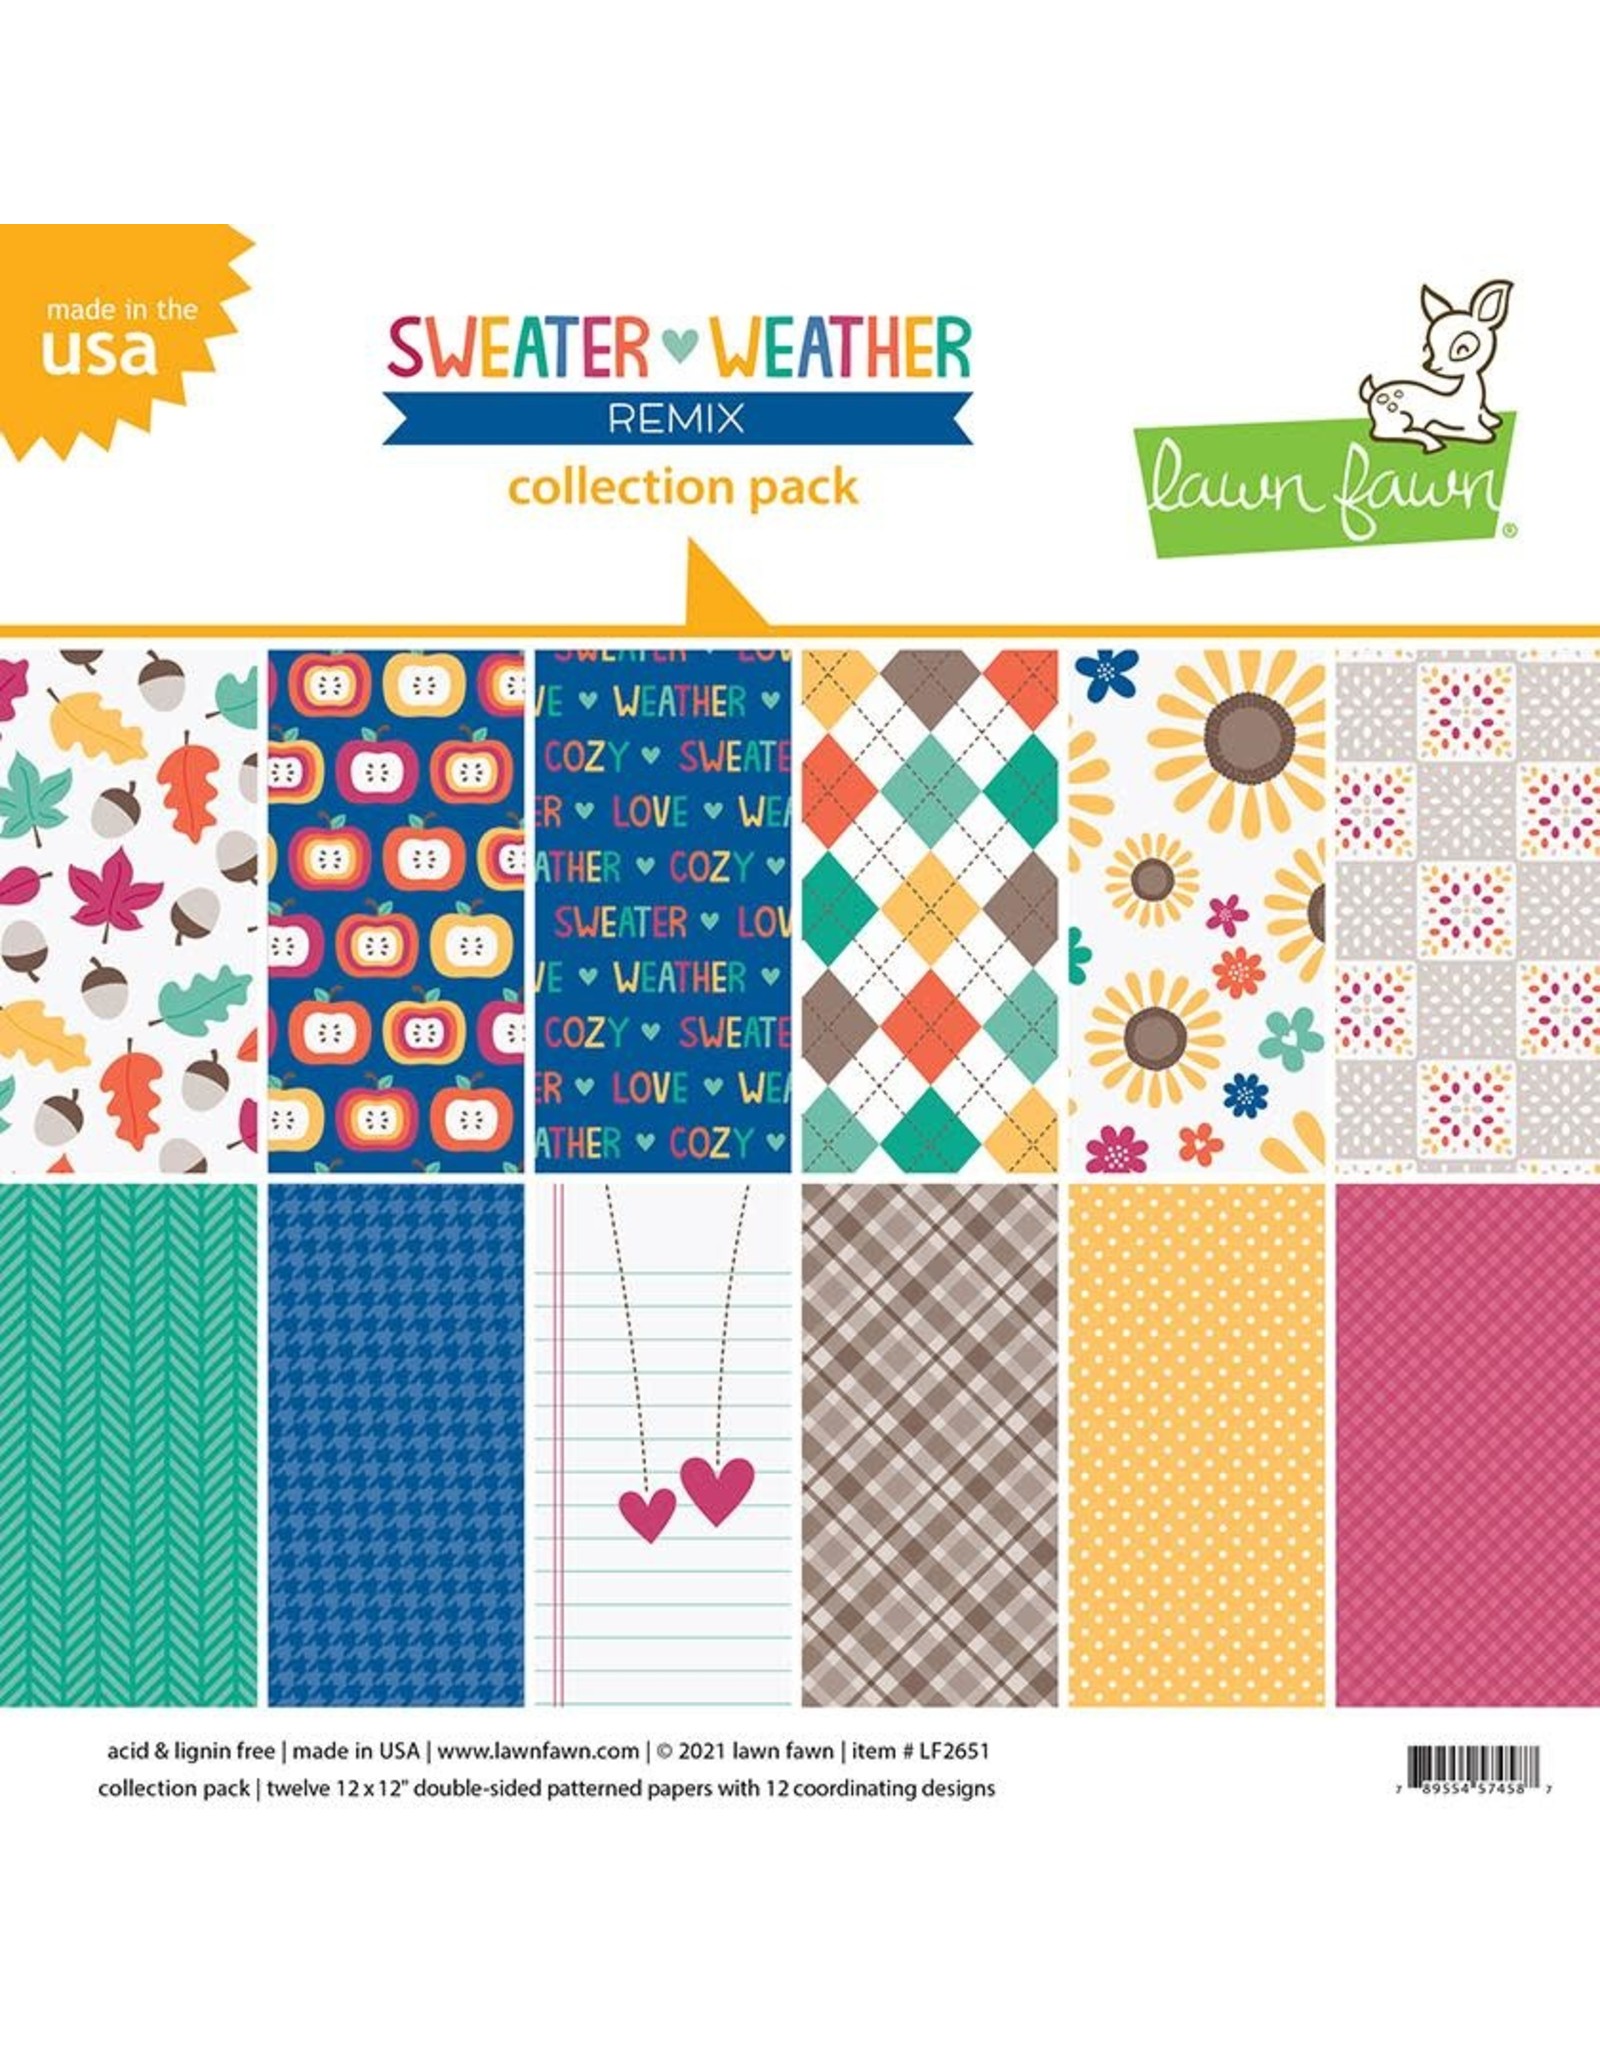 LAWN FAWN LAWN FAWN SWEATER WEATHER REMIX 12x12 COLLECTION PACK 12 SHEETS